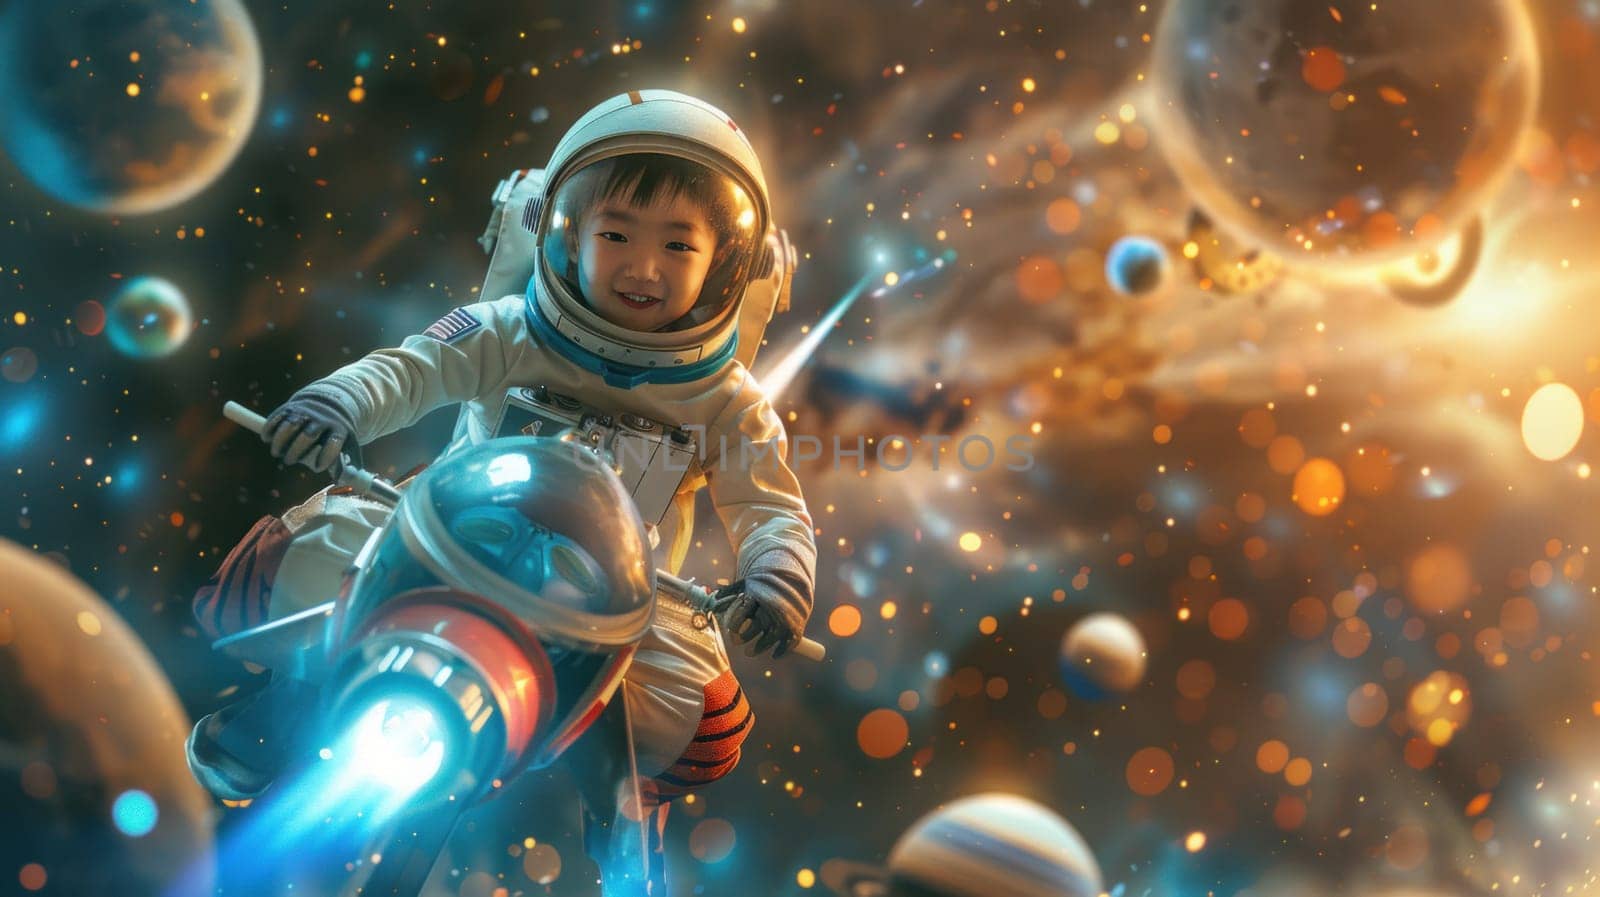 Happy Asian Boy Wearing Spacesuit Riding Fairy Tale Like Toy Rocket with Background of Planets in Universe Starry Sky Concept Imaginative Adventure.